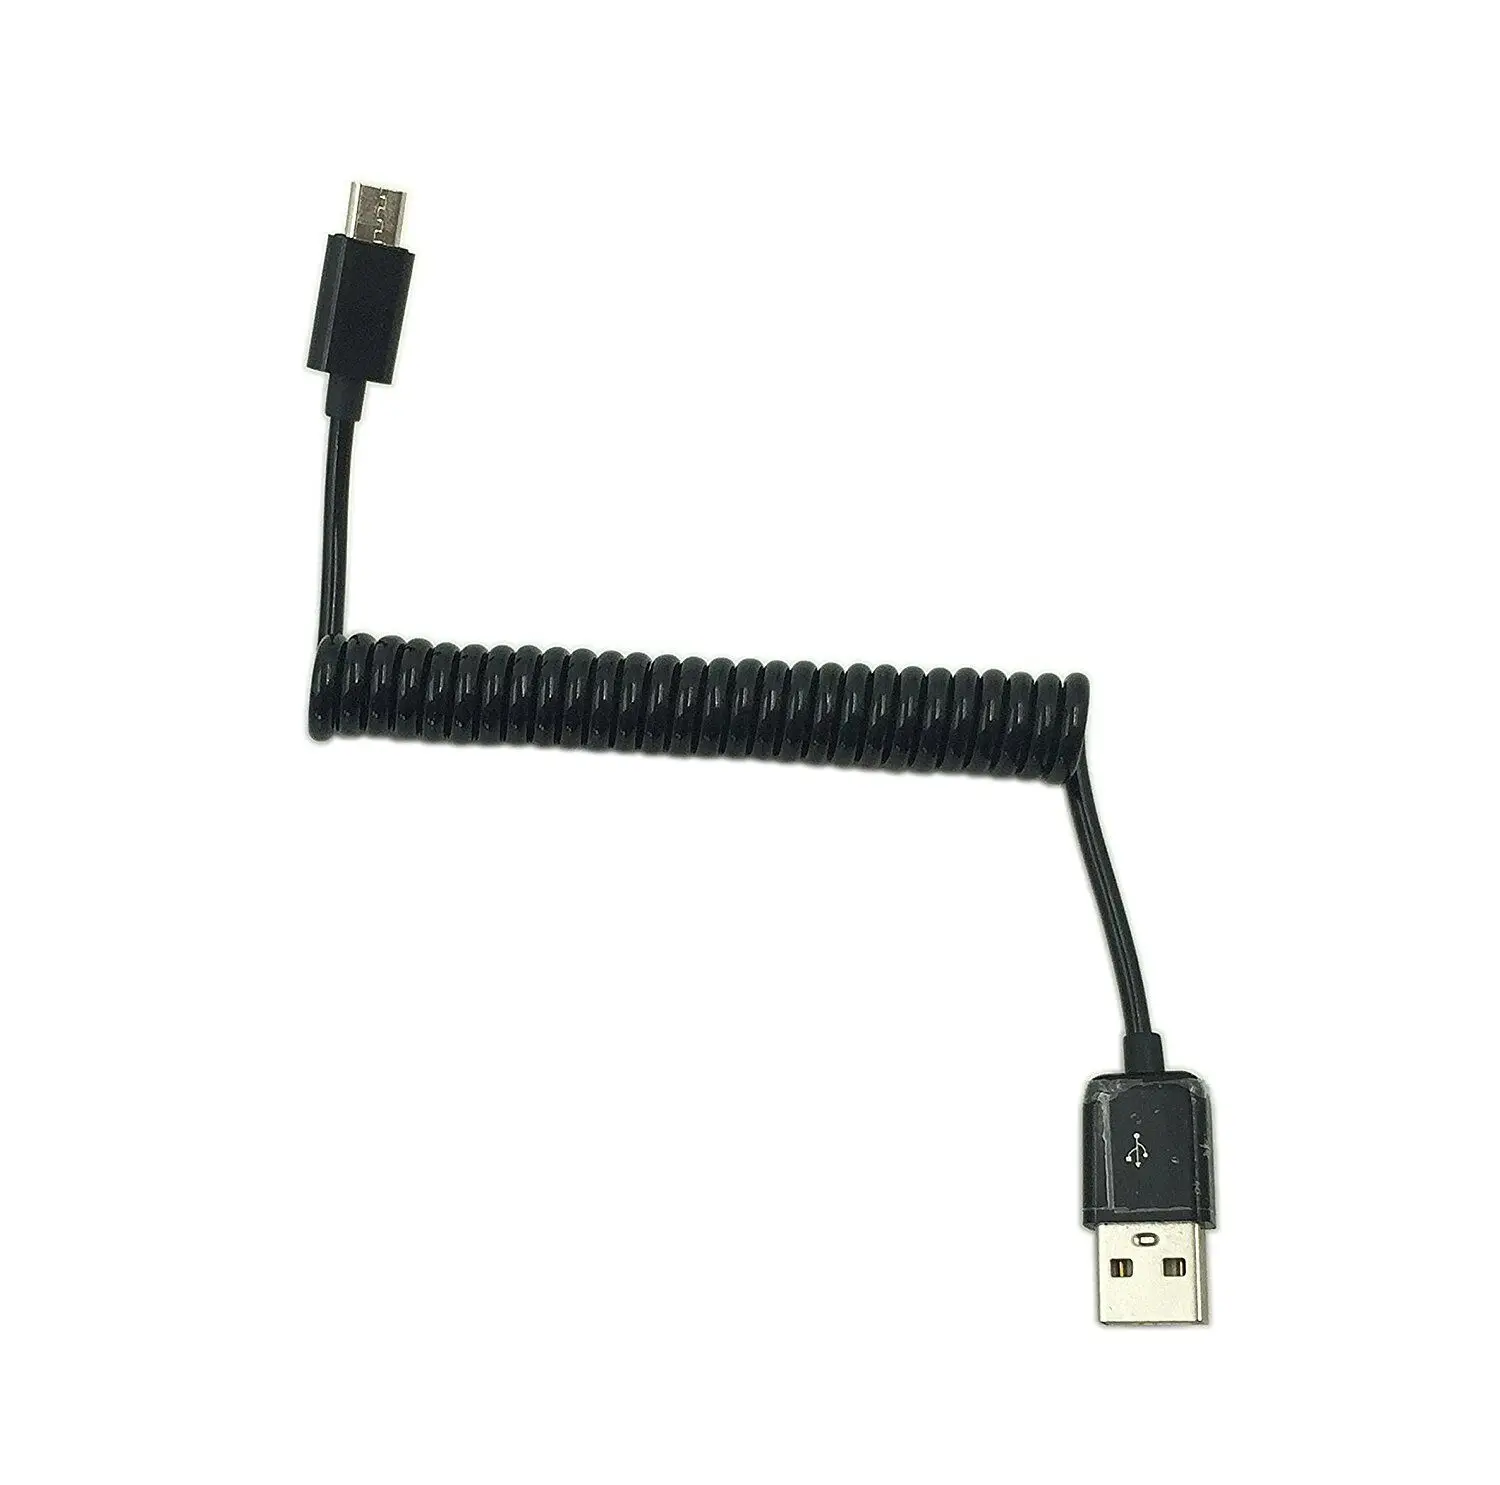 

Cabletolink factory Mini usb 5pin Male to USB 2.0 A male data power charge spring cable